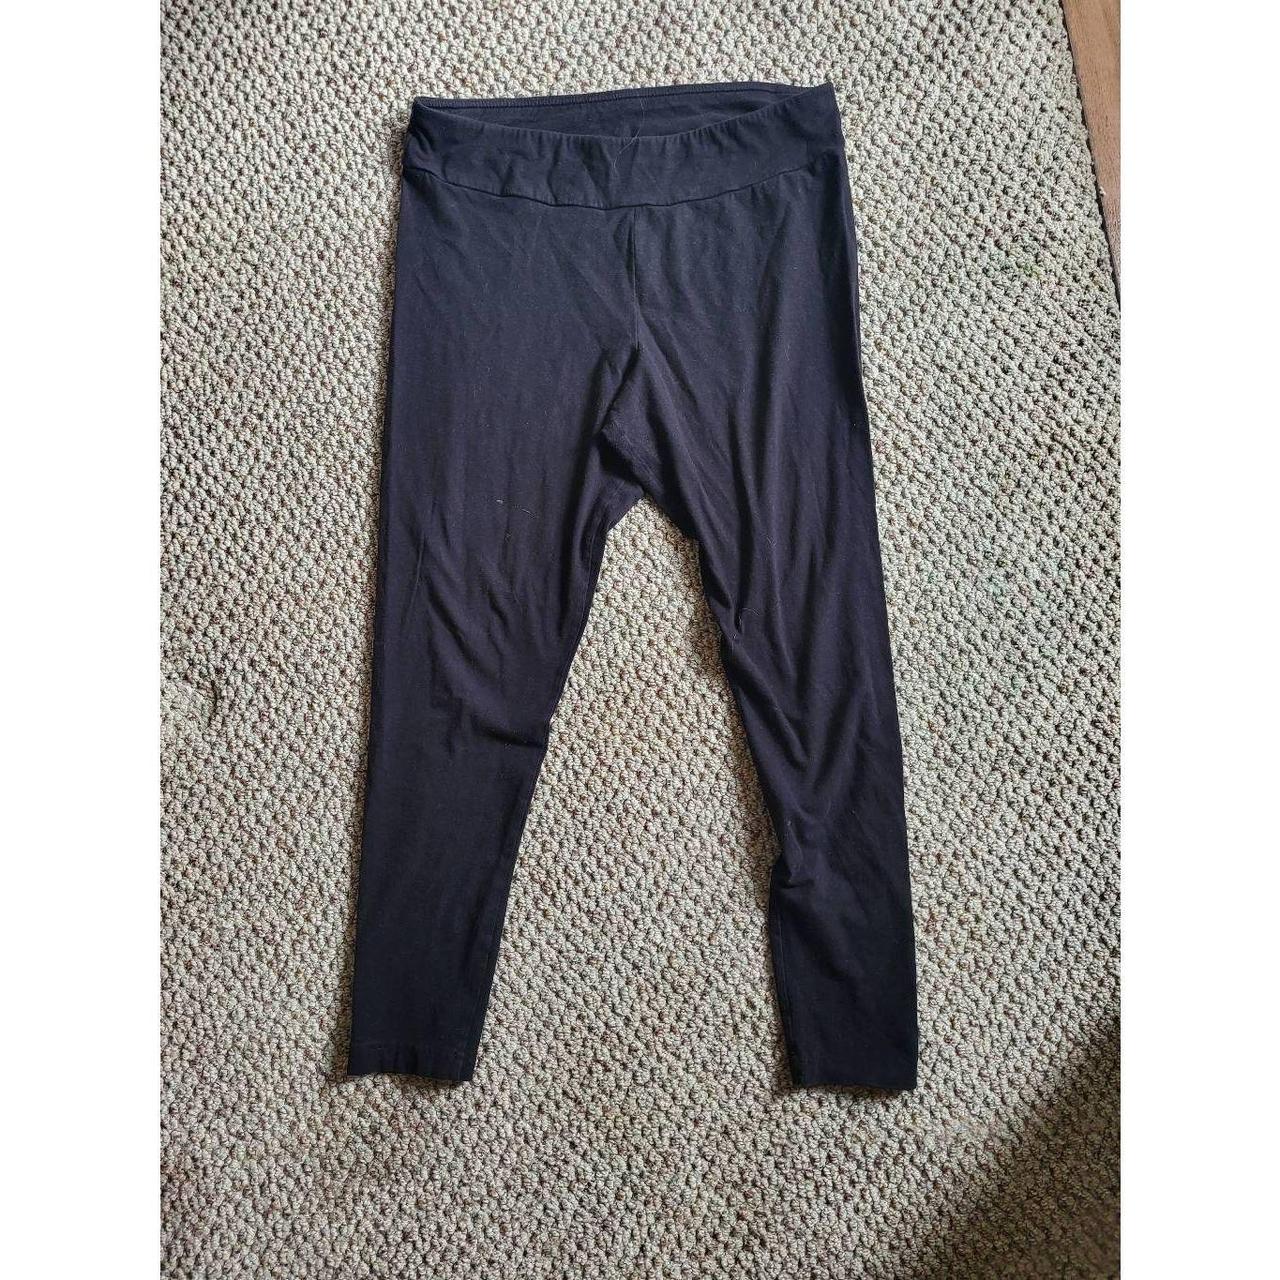 TIME and tru leggings women's size large 12-14